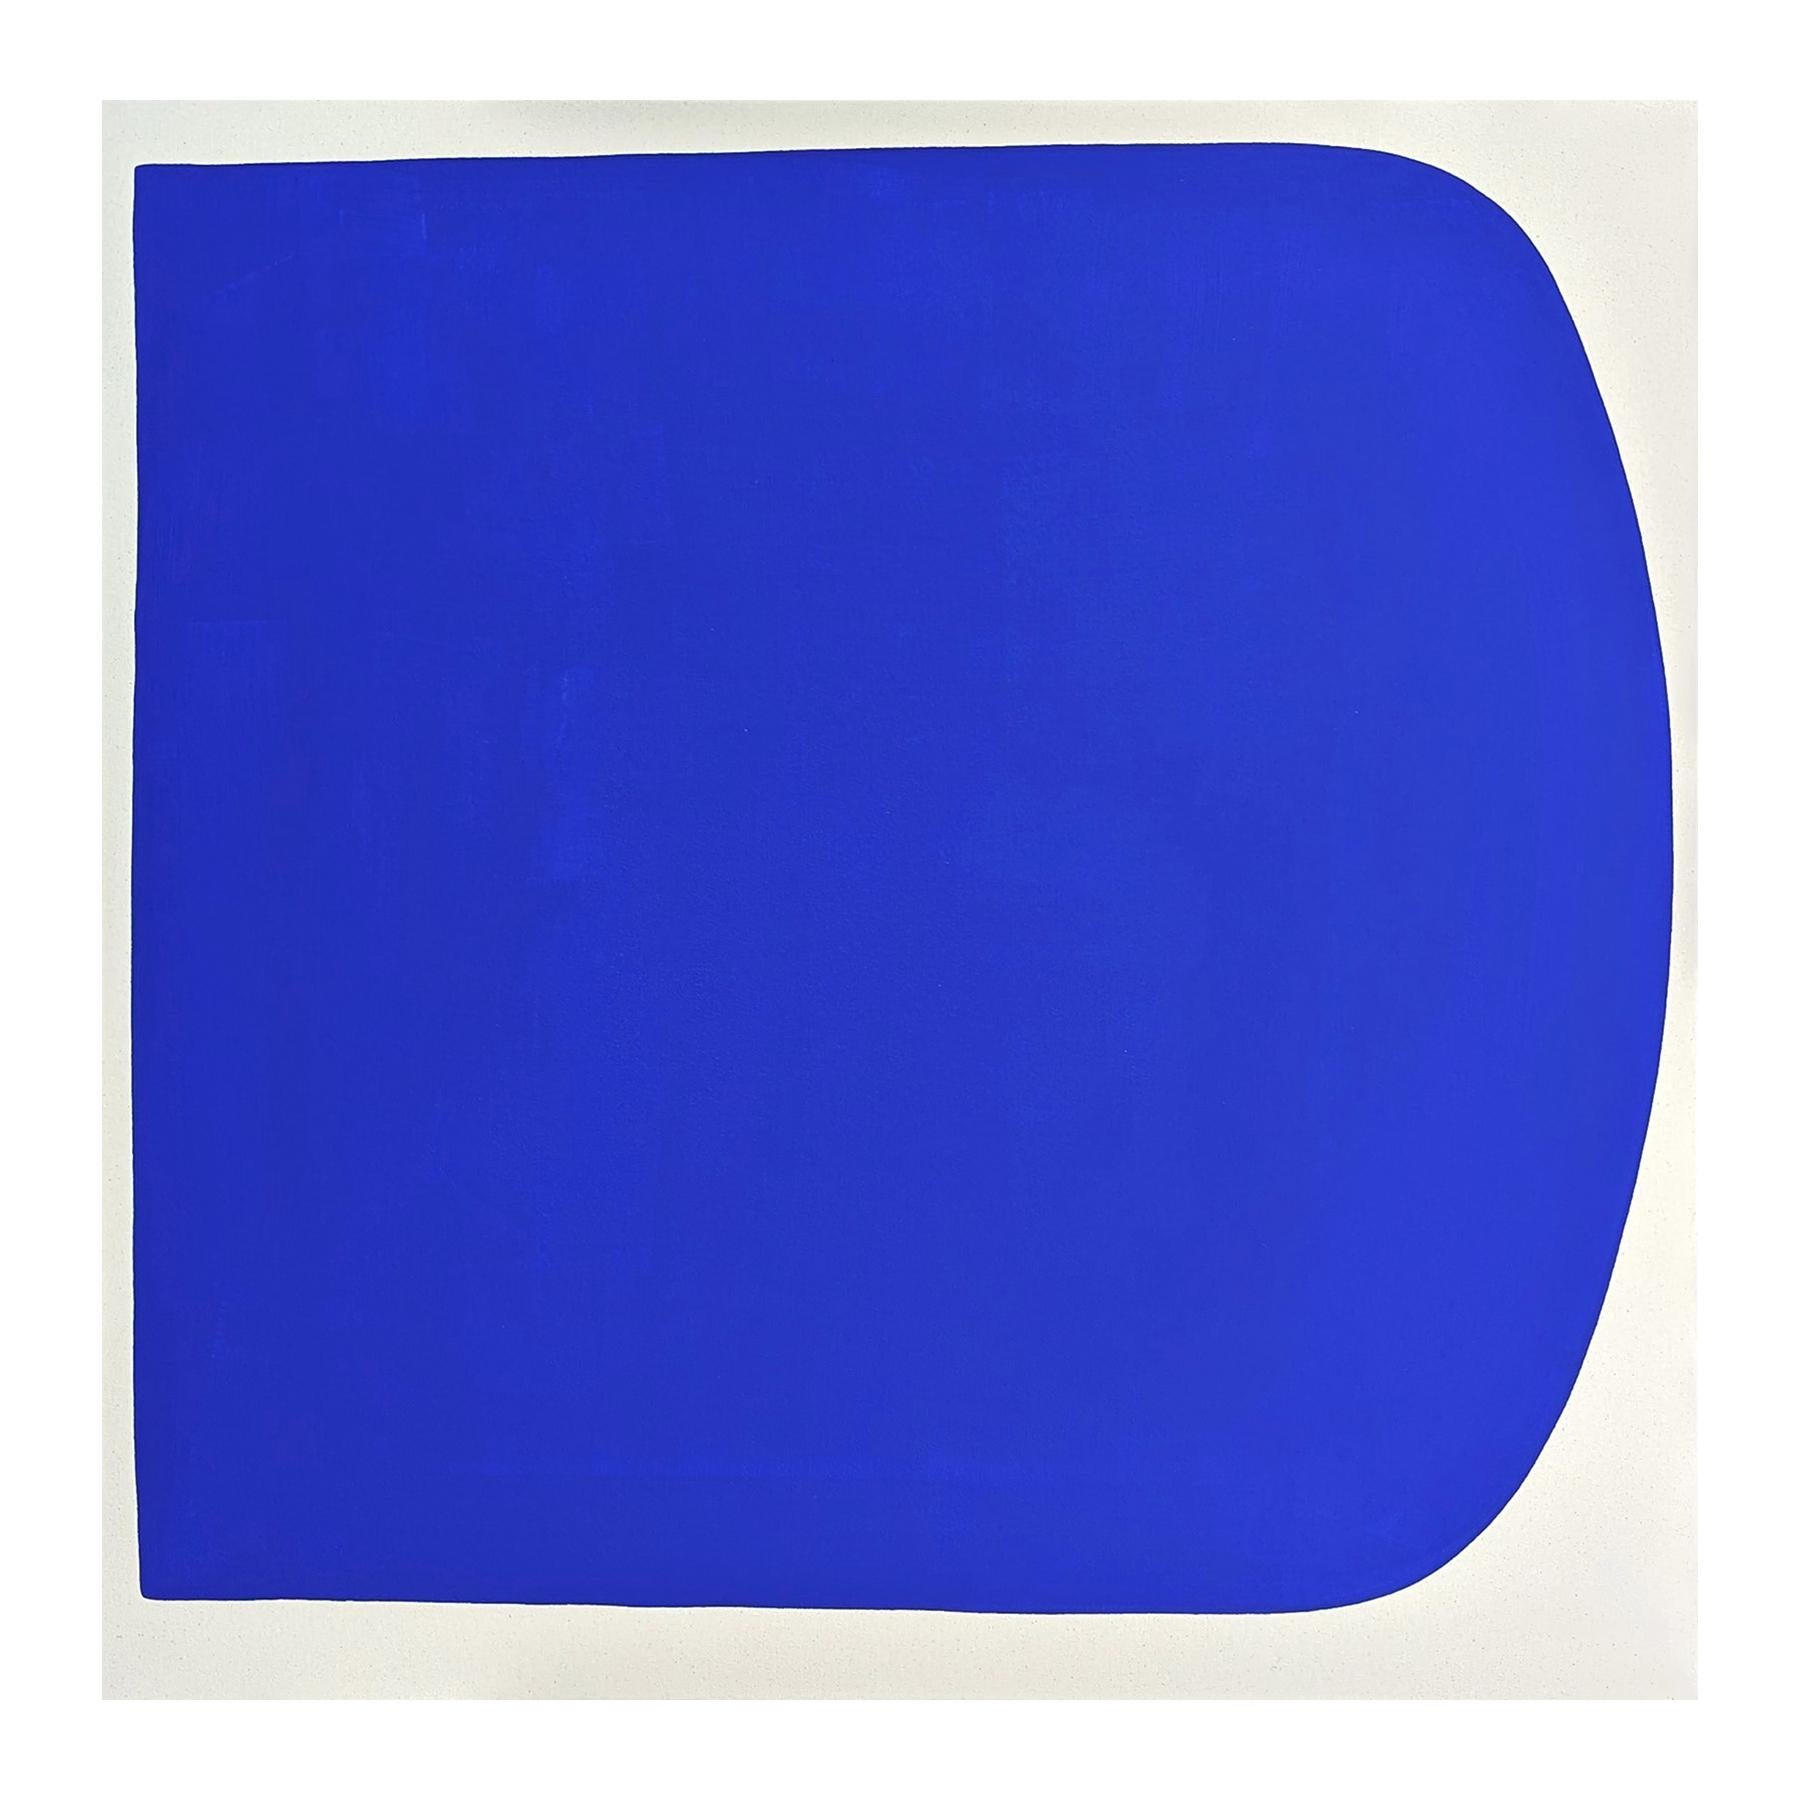 Contemporary abstract painting by Houston-based artist Gary Griffin. The work features a central bright blue rounded square shape set against an off-white background. Signed, titled, and dated on the reverse. Currently unframed, but options are